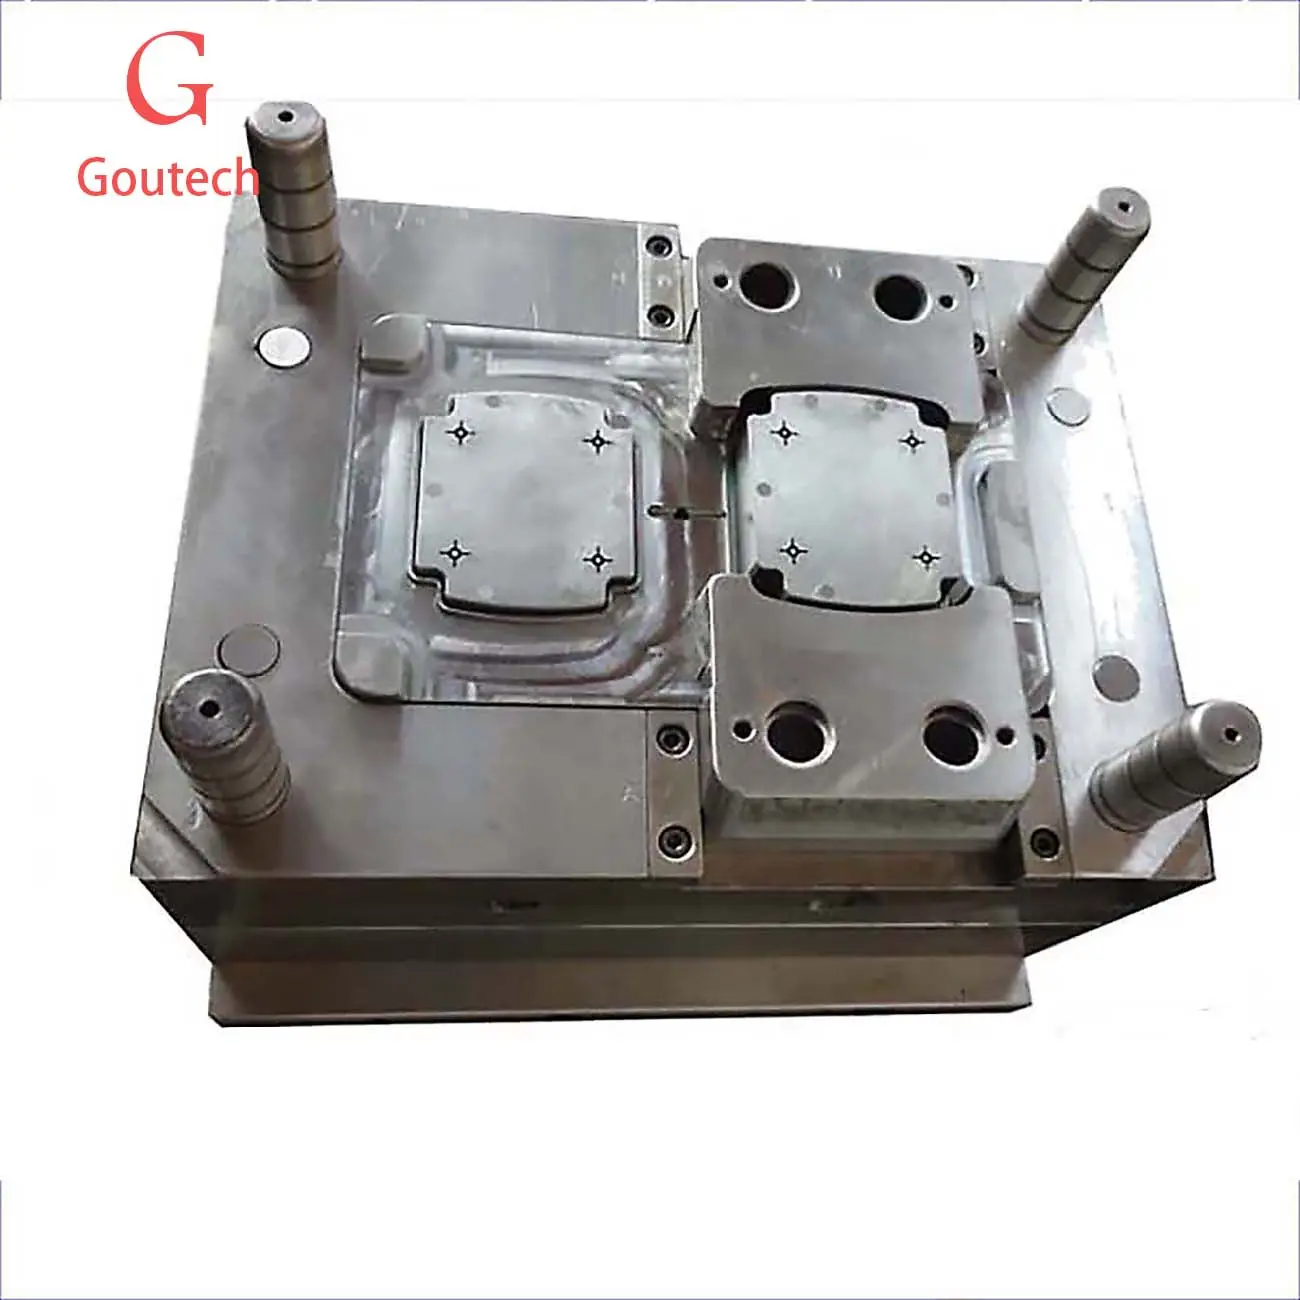 Injection Mold for Plastic parts with hot runner cold runner system